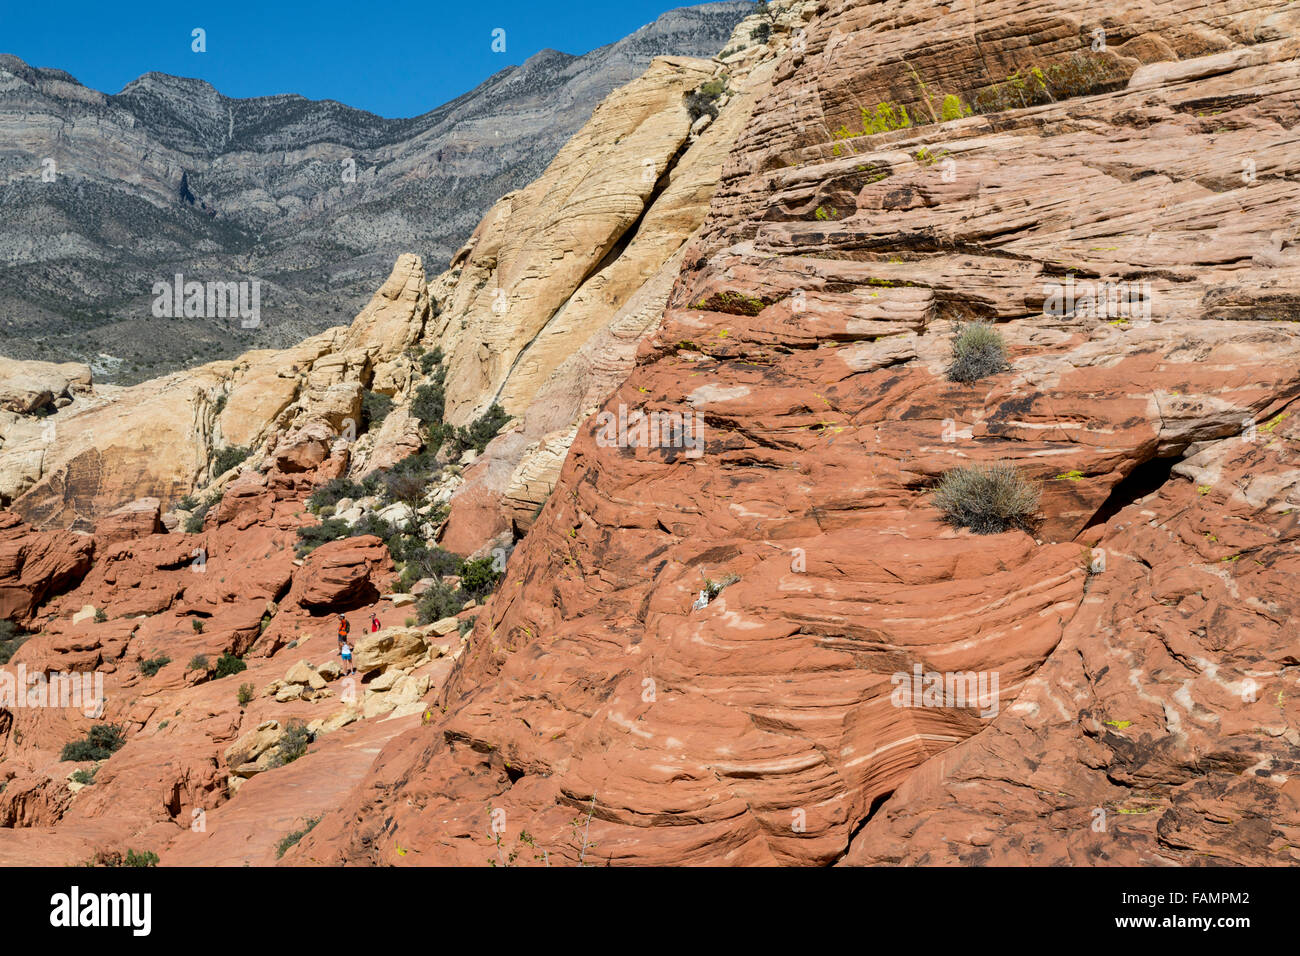 Red Rock Canyon, Nevada, Calico Tanks Trail.  Red Sandstone showing  Cross-bedding from ancient Sand Dunes. Stock Photo